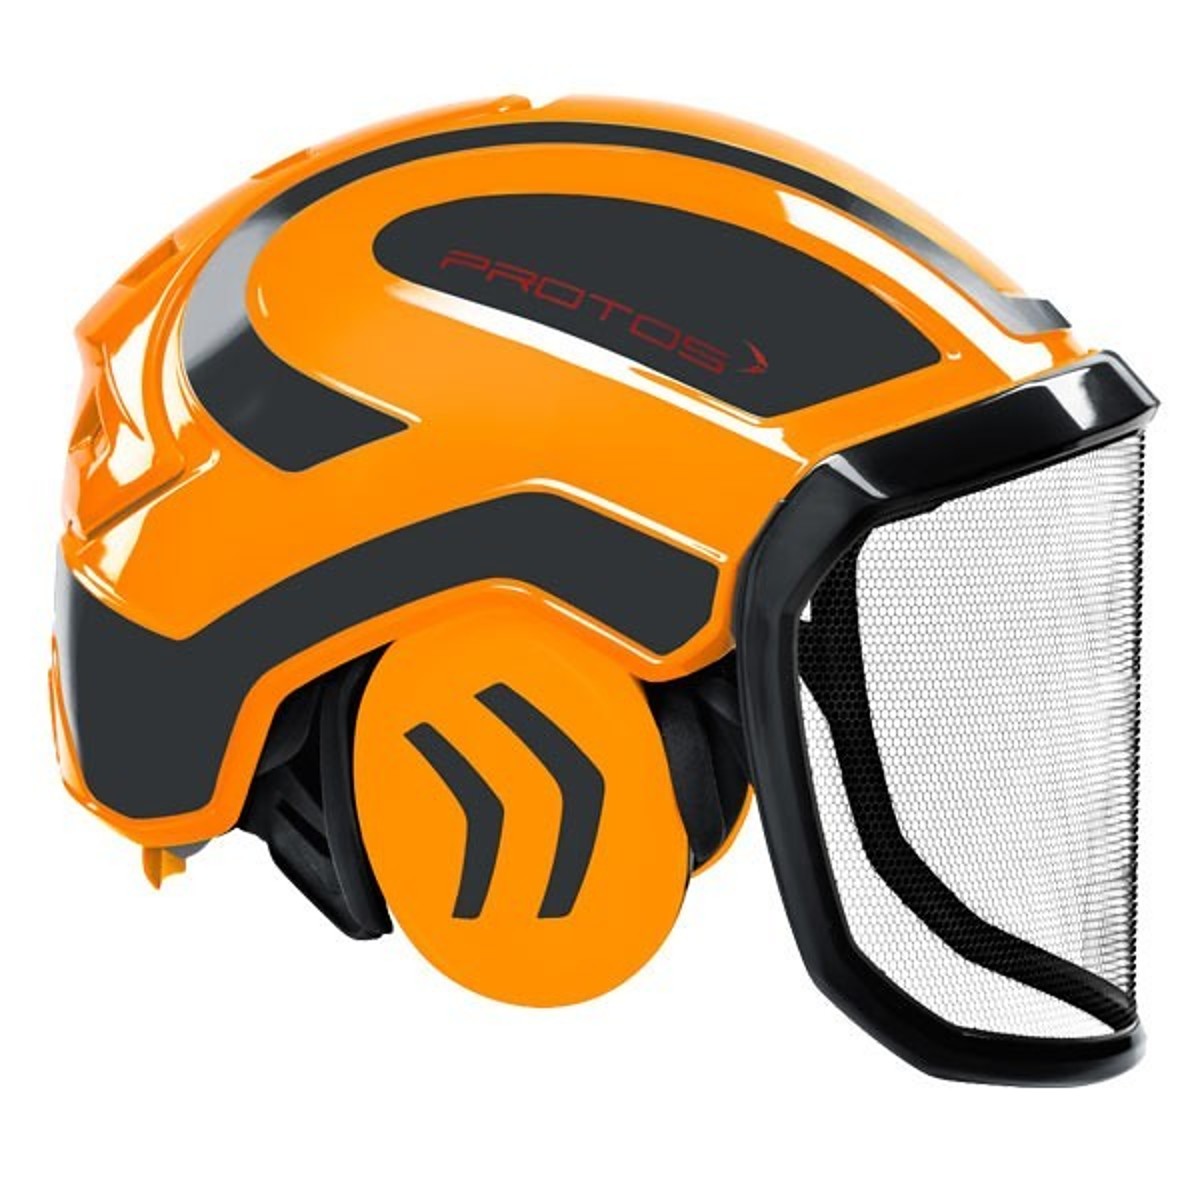 Protos Helm Integral Forest - 7